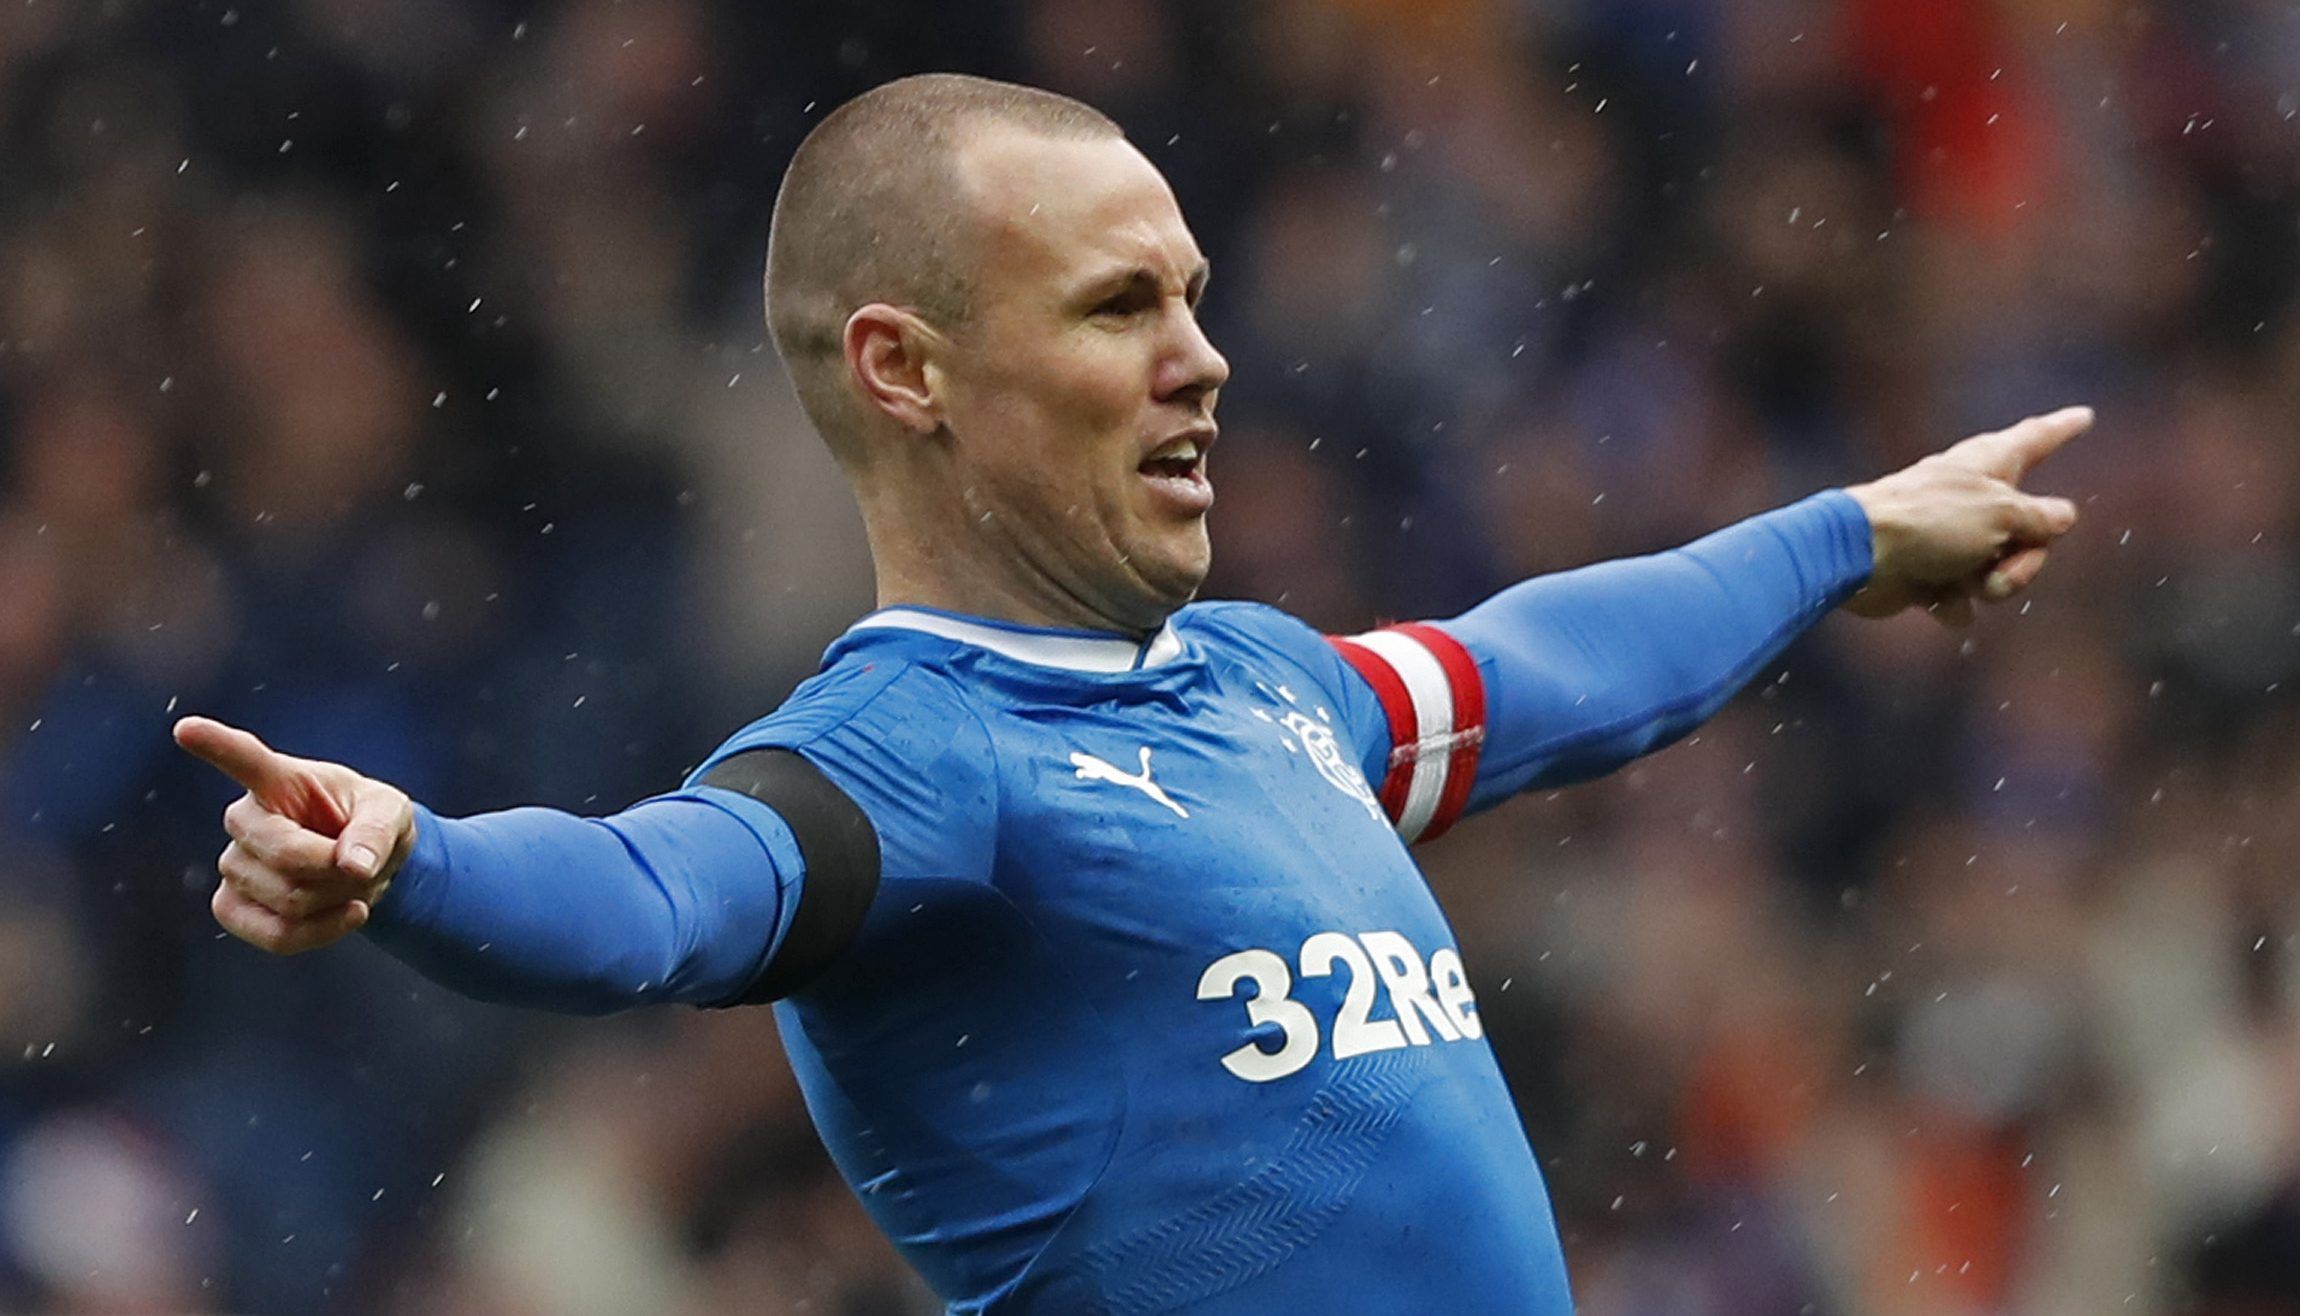 Britain Football Soccer - Rangers v Celtic - Scottish Premiership - Ibrox Stadium - 31/12/16 Rangers' Kenny Miller celebrates scoring their first goal  Reuters / Russell Cheyne Livepic EDITORIAL USE ONLY. No use with unauthorized audio, video, data, fixture lists, club/league logos or 